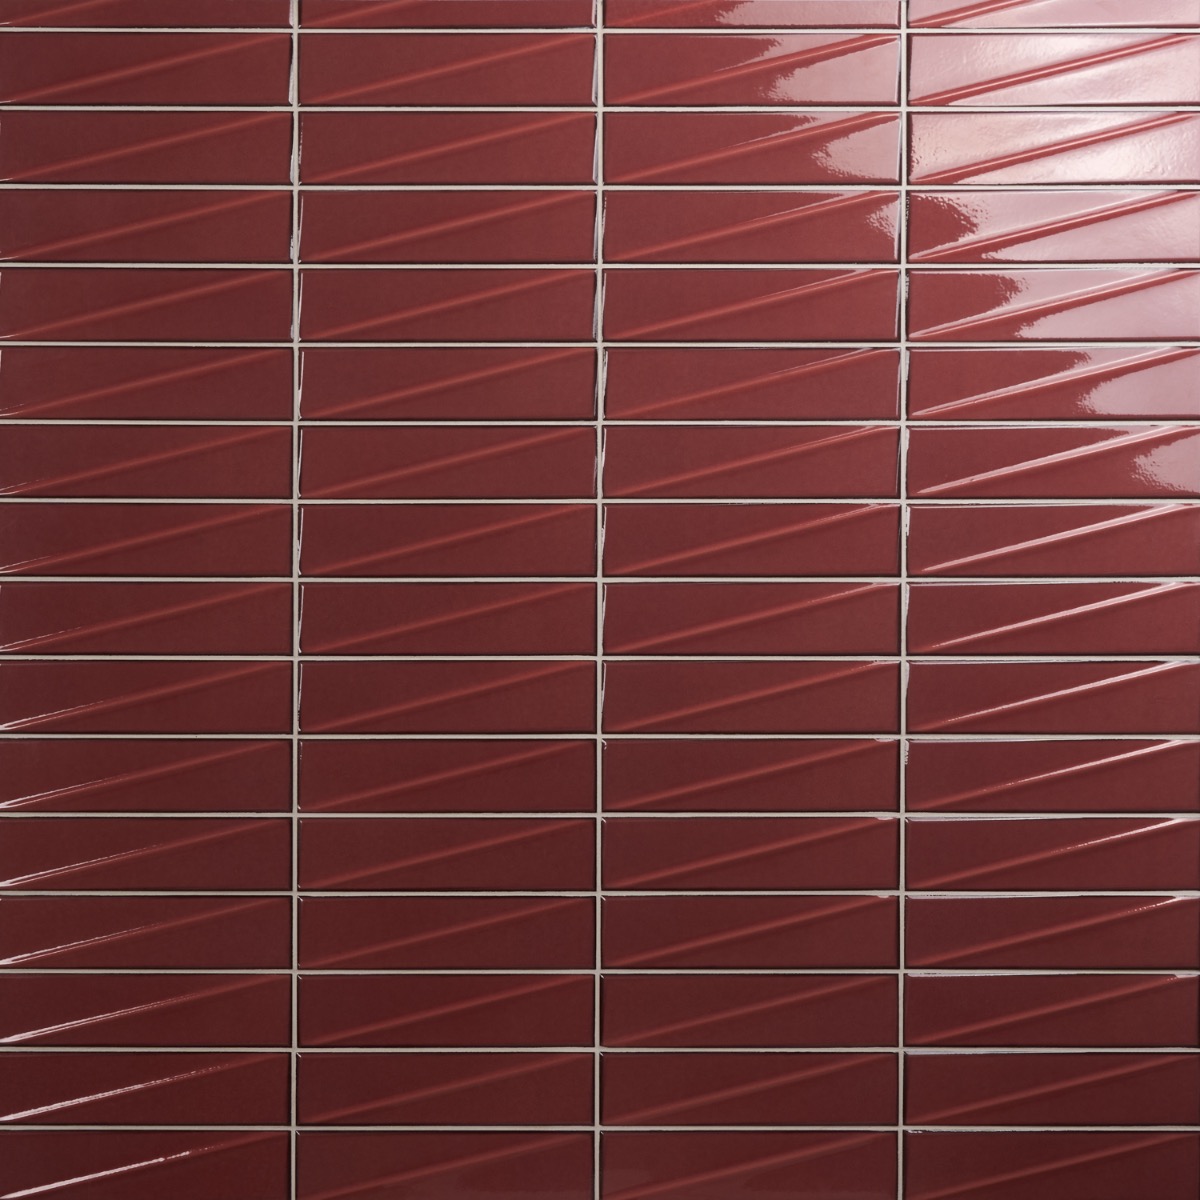 Axelle Ruby Red 3x12 3D Glossy Ceramic Subway Tile